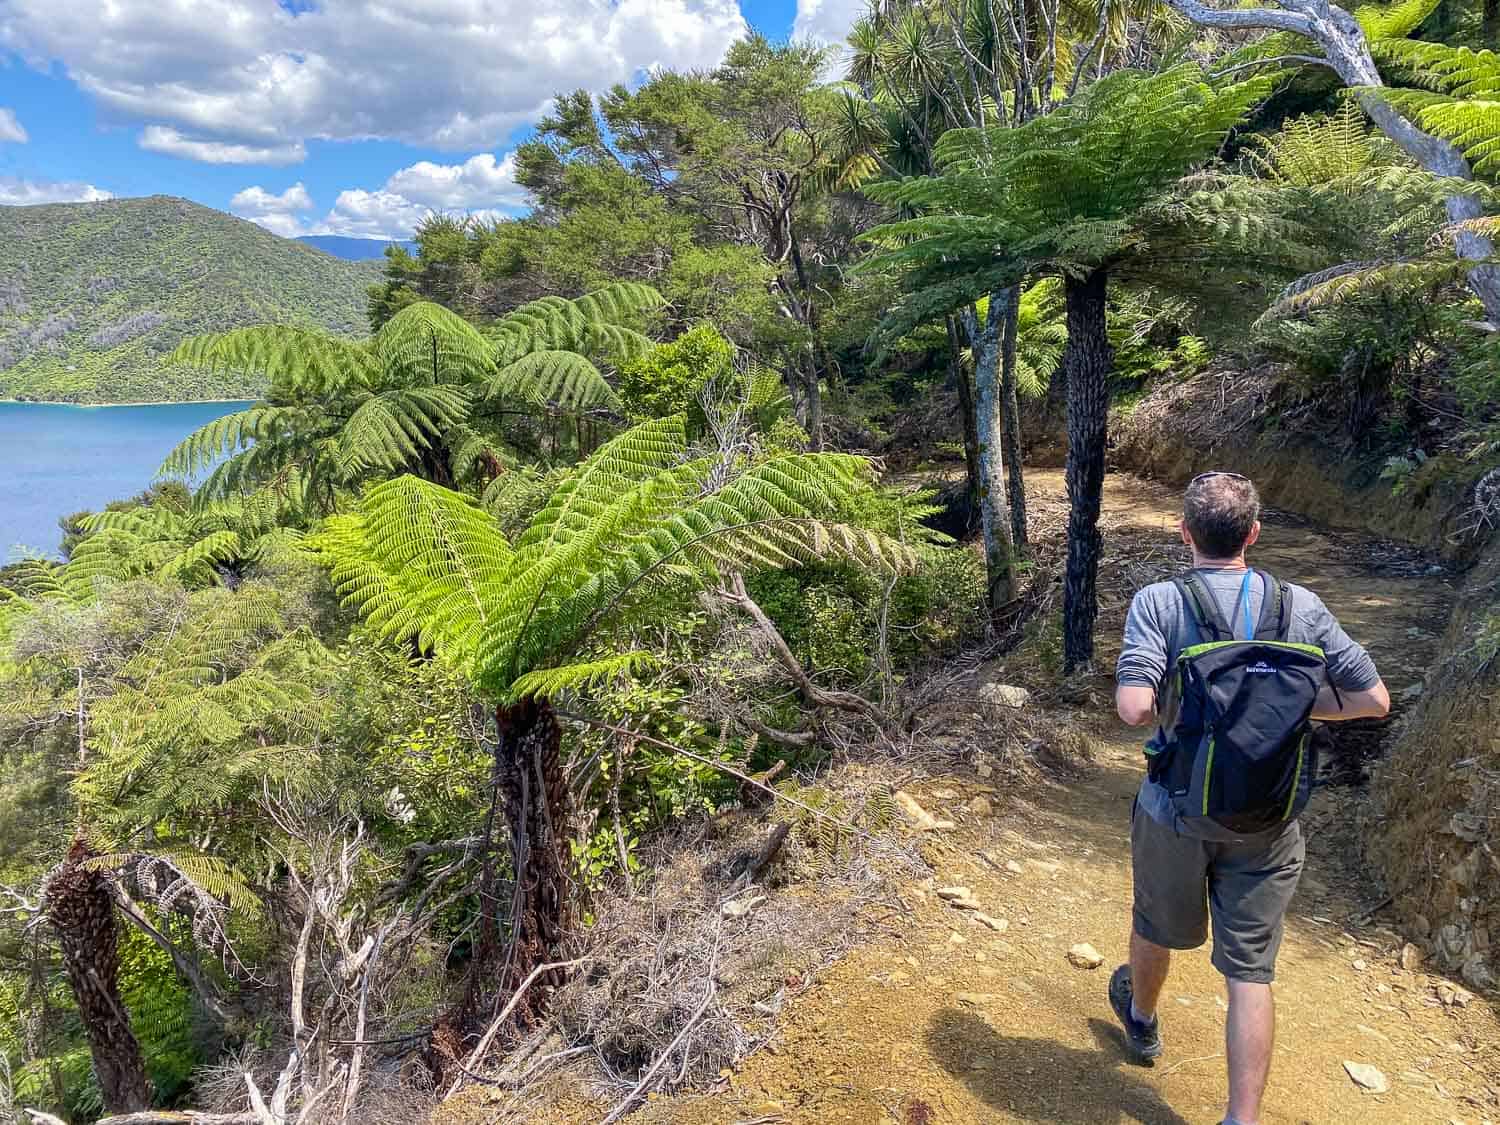 Walking the Queen Charlotte Track on Day 1 from Ship Cove to Furneaux Lodge